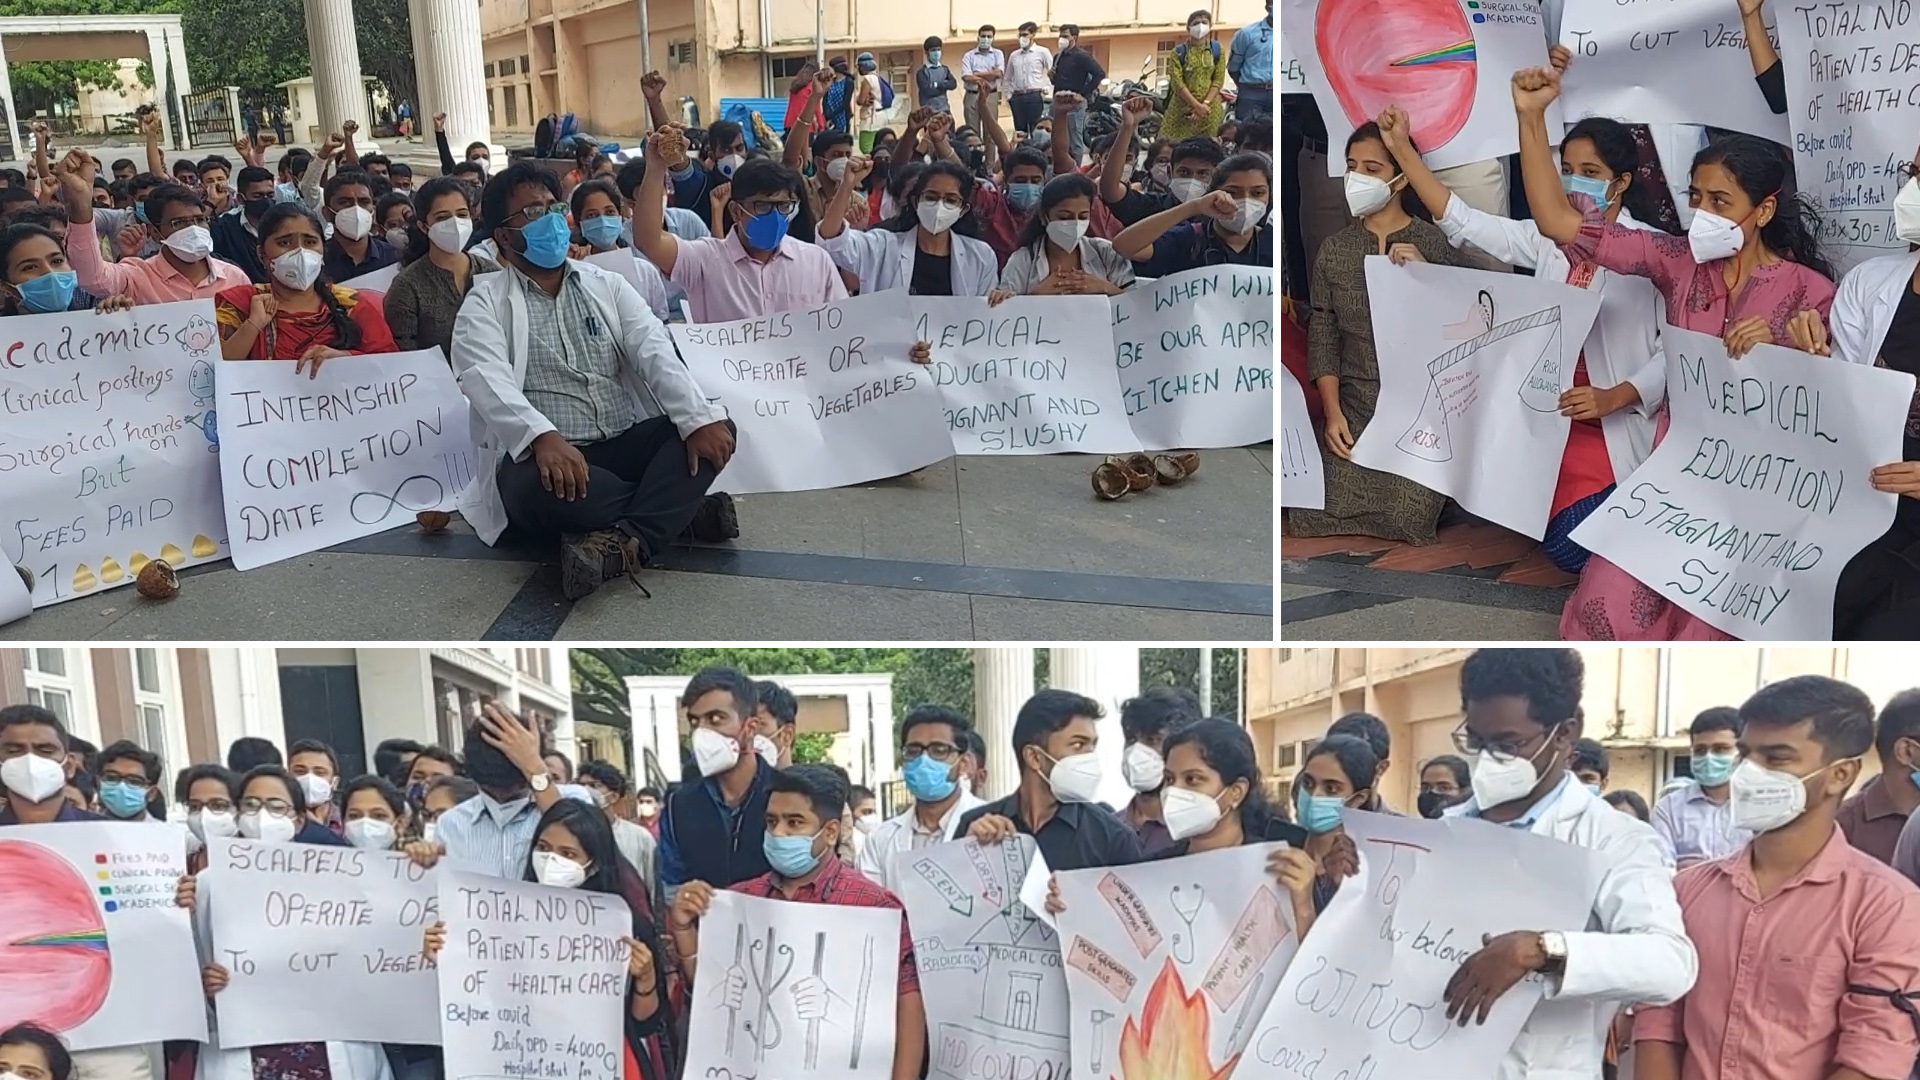 Doctors protest in Karnataka for resumption of non-COVID services